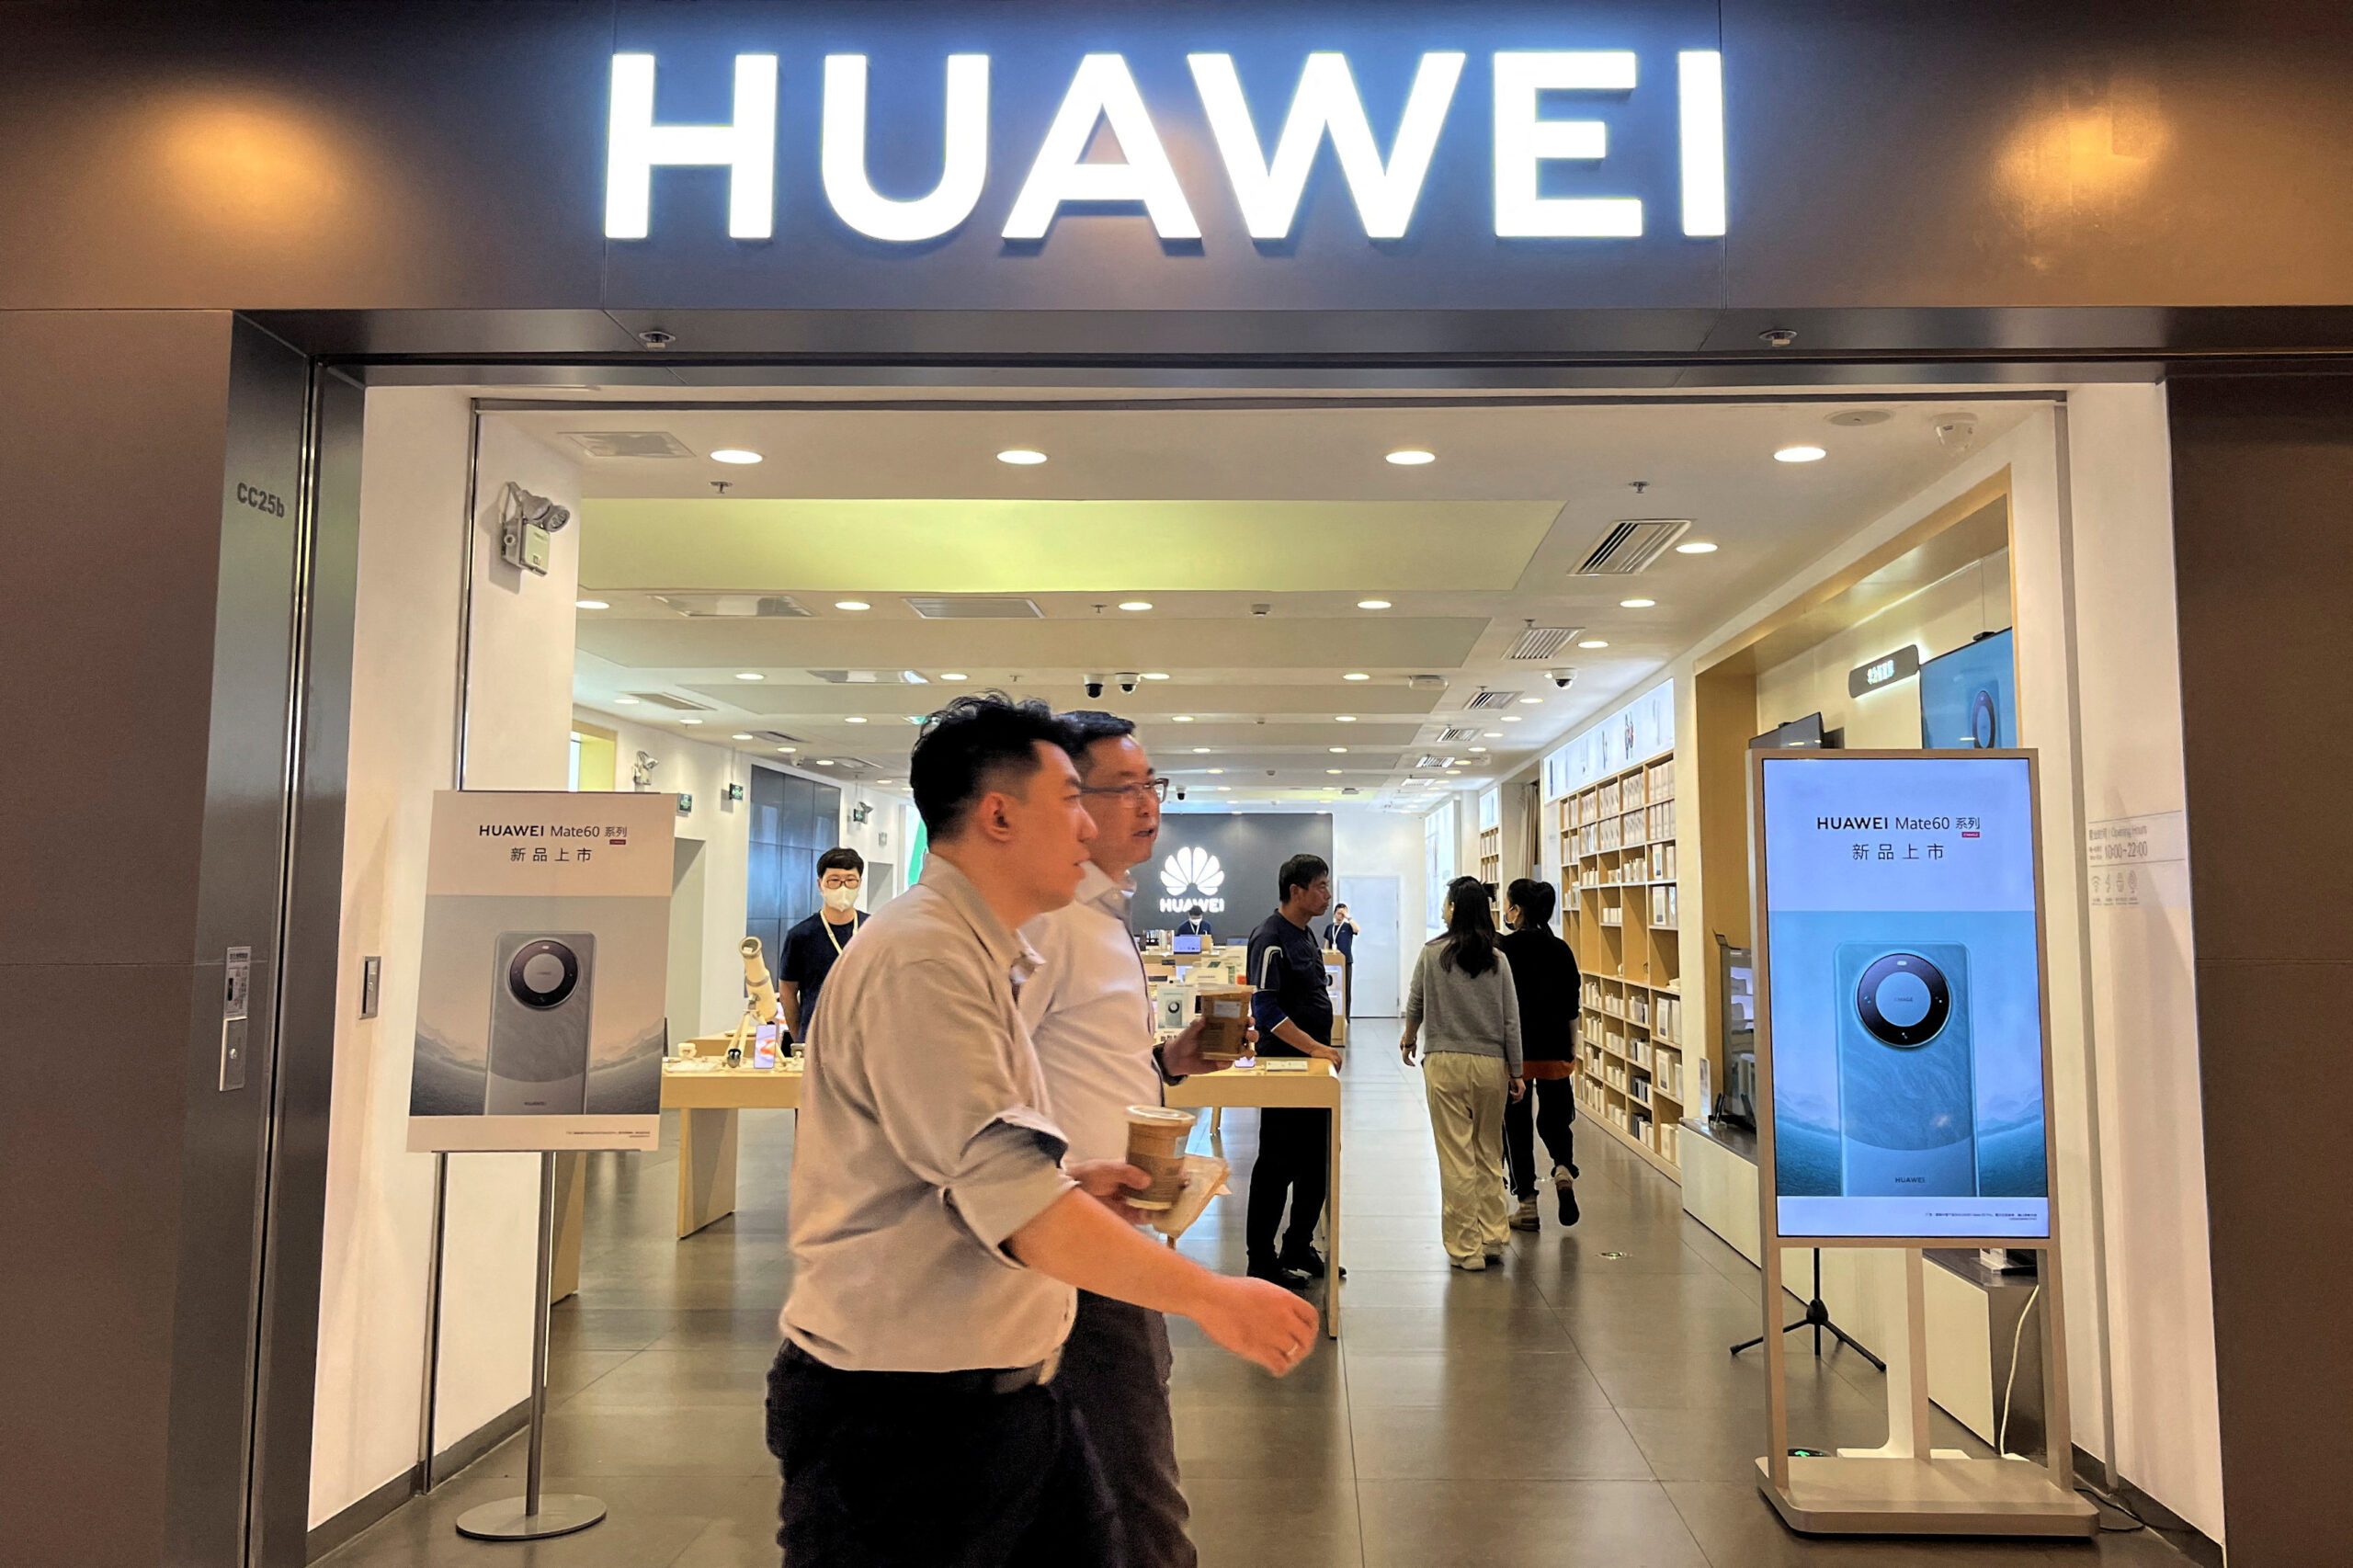 Why is Huawei’s new smartphone generating so much buzz?